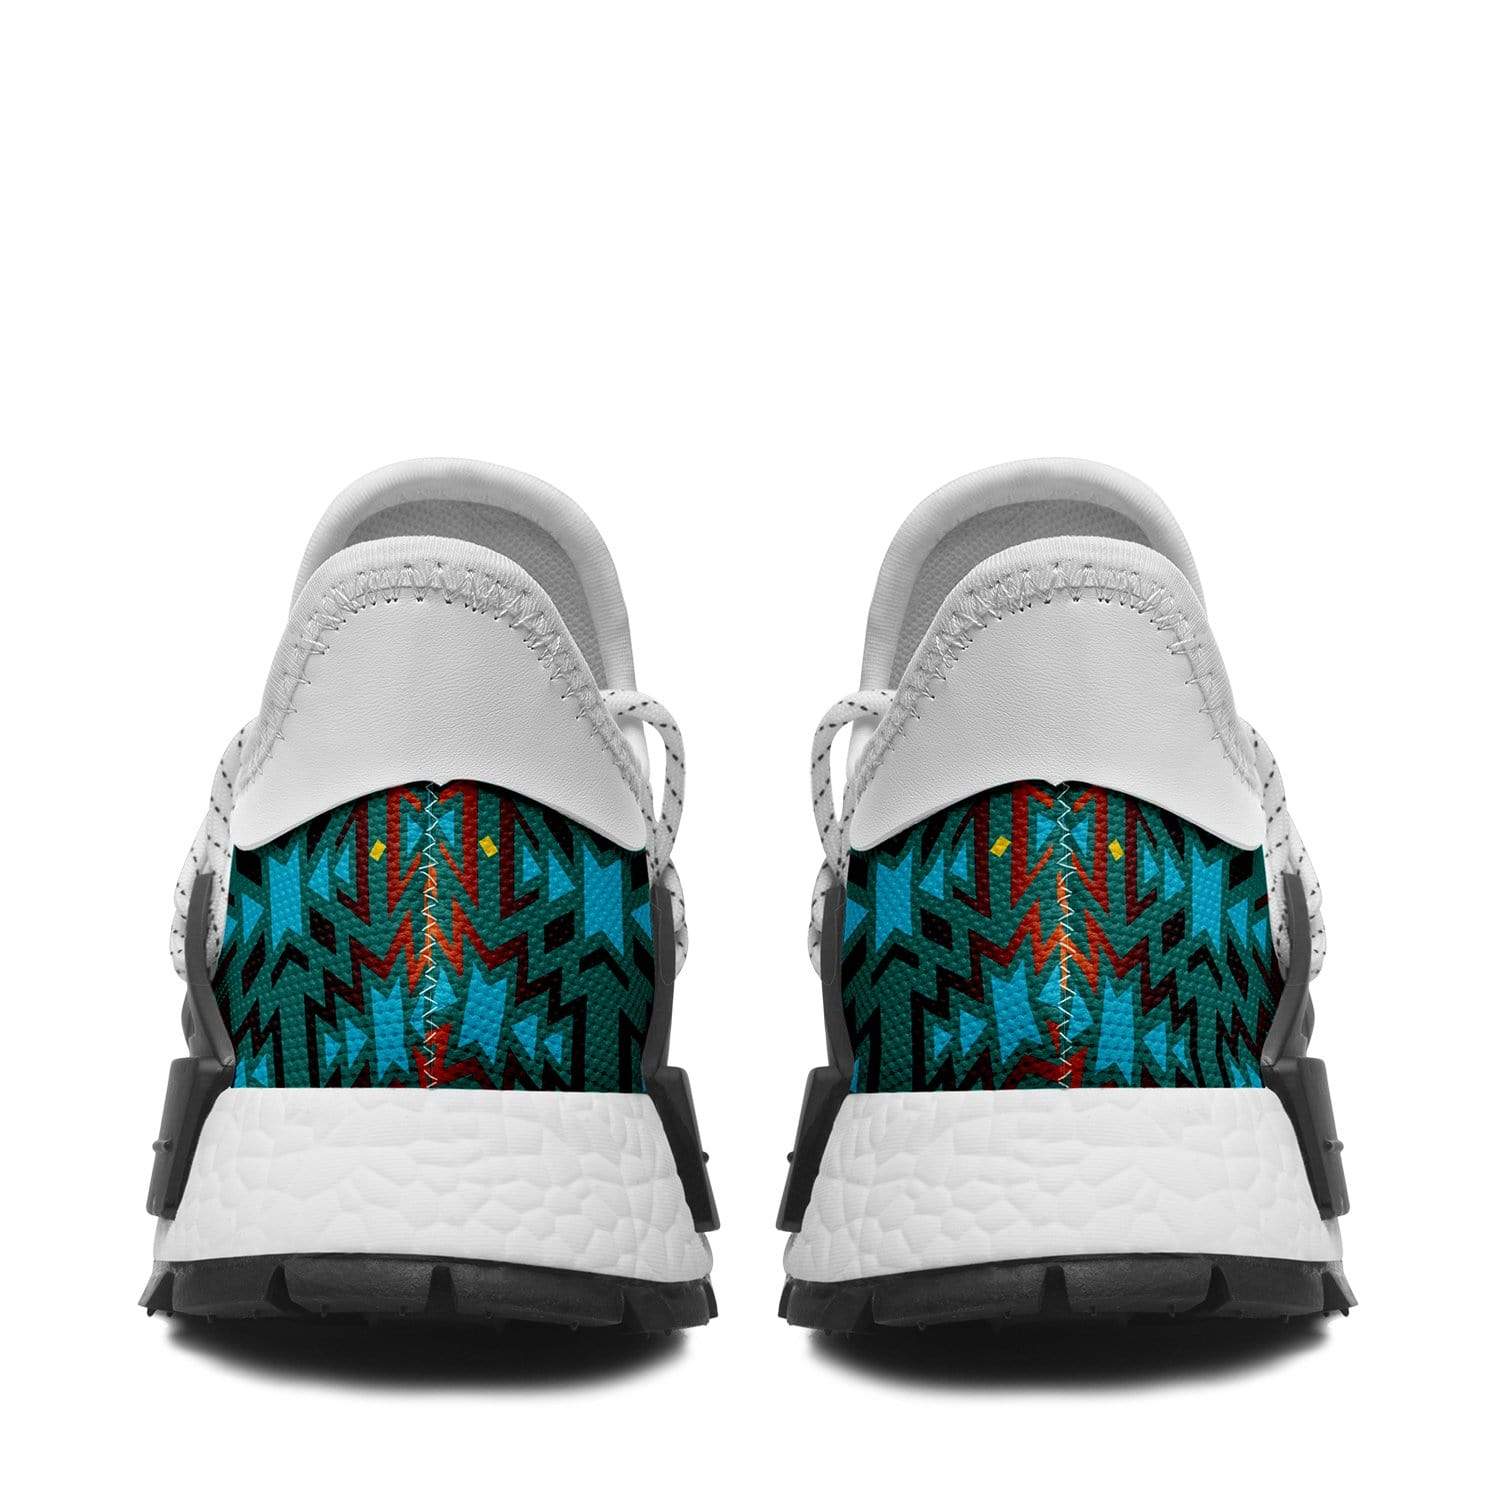 Fire Colors and Turquoise Teal Okaki Sneakers Shoes 49 Dzine 